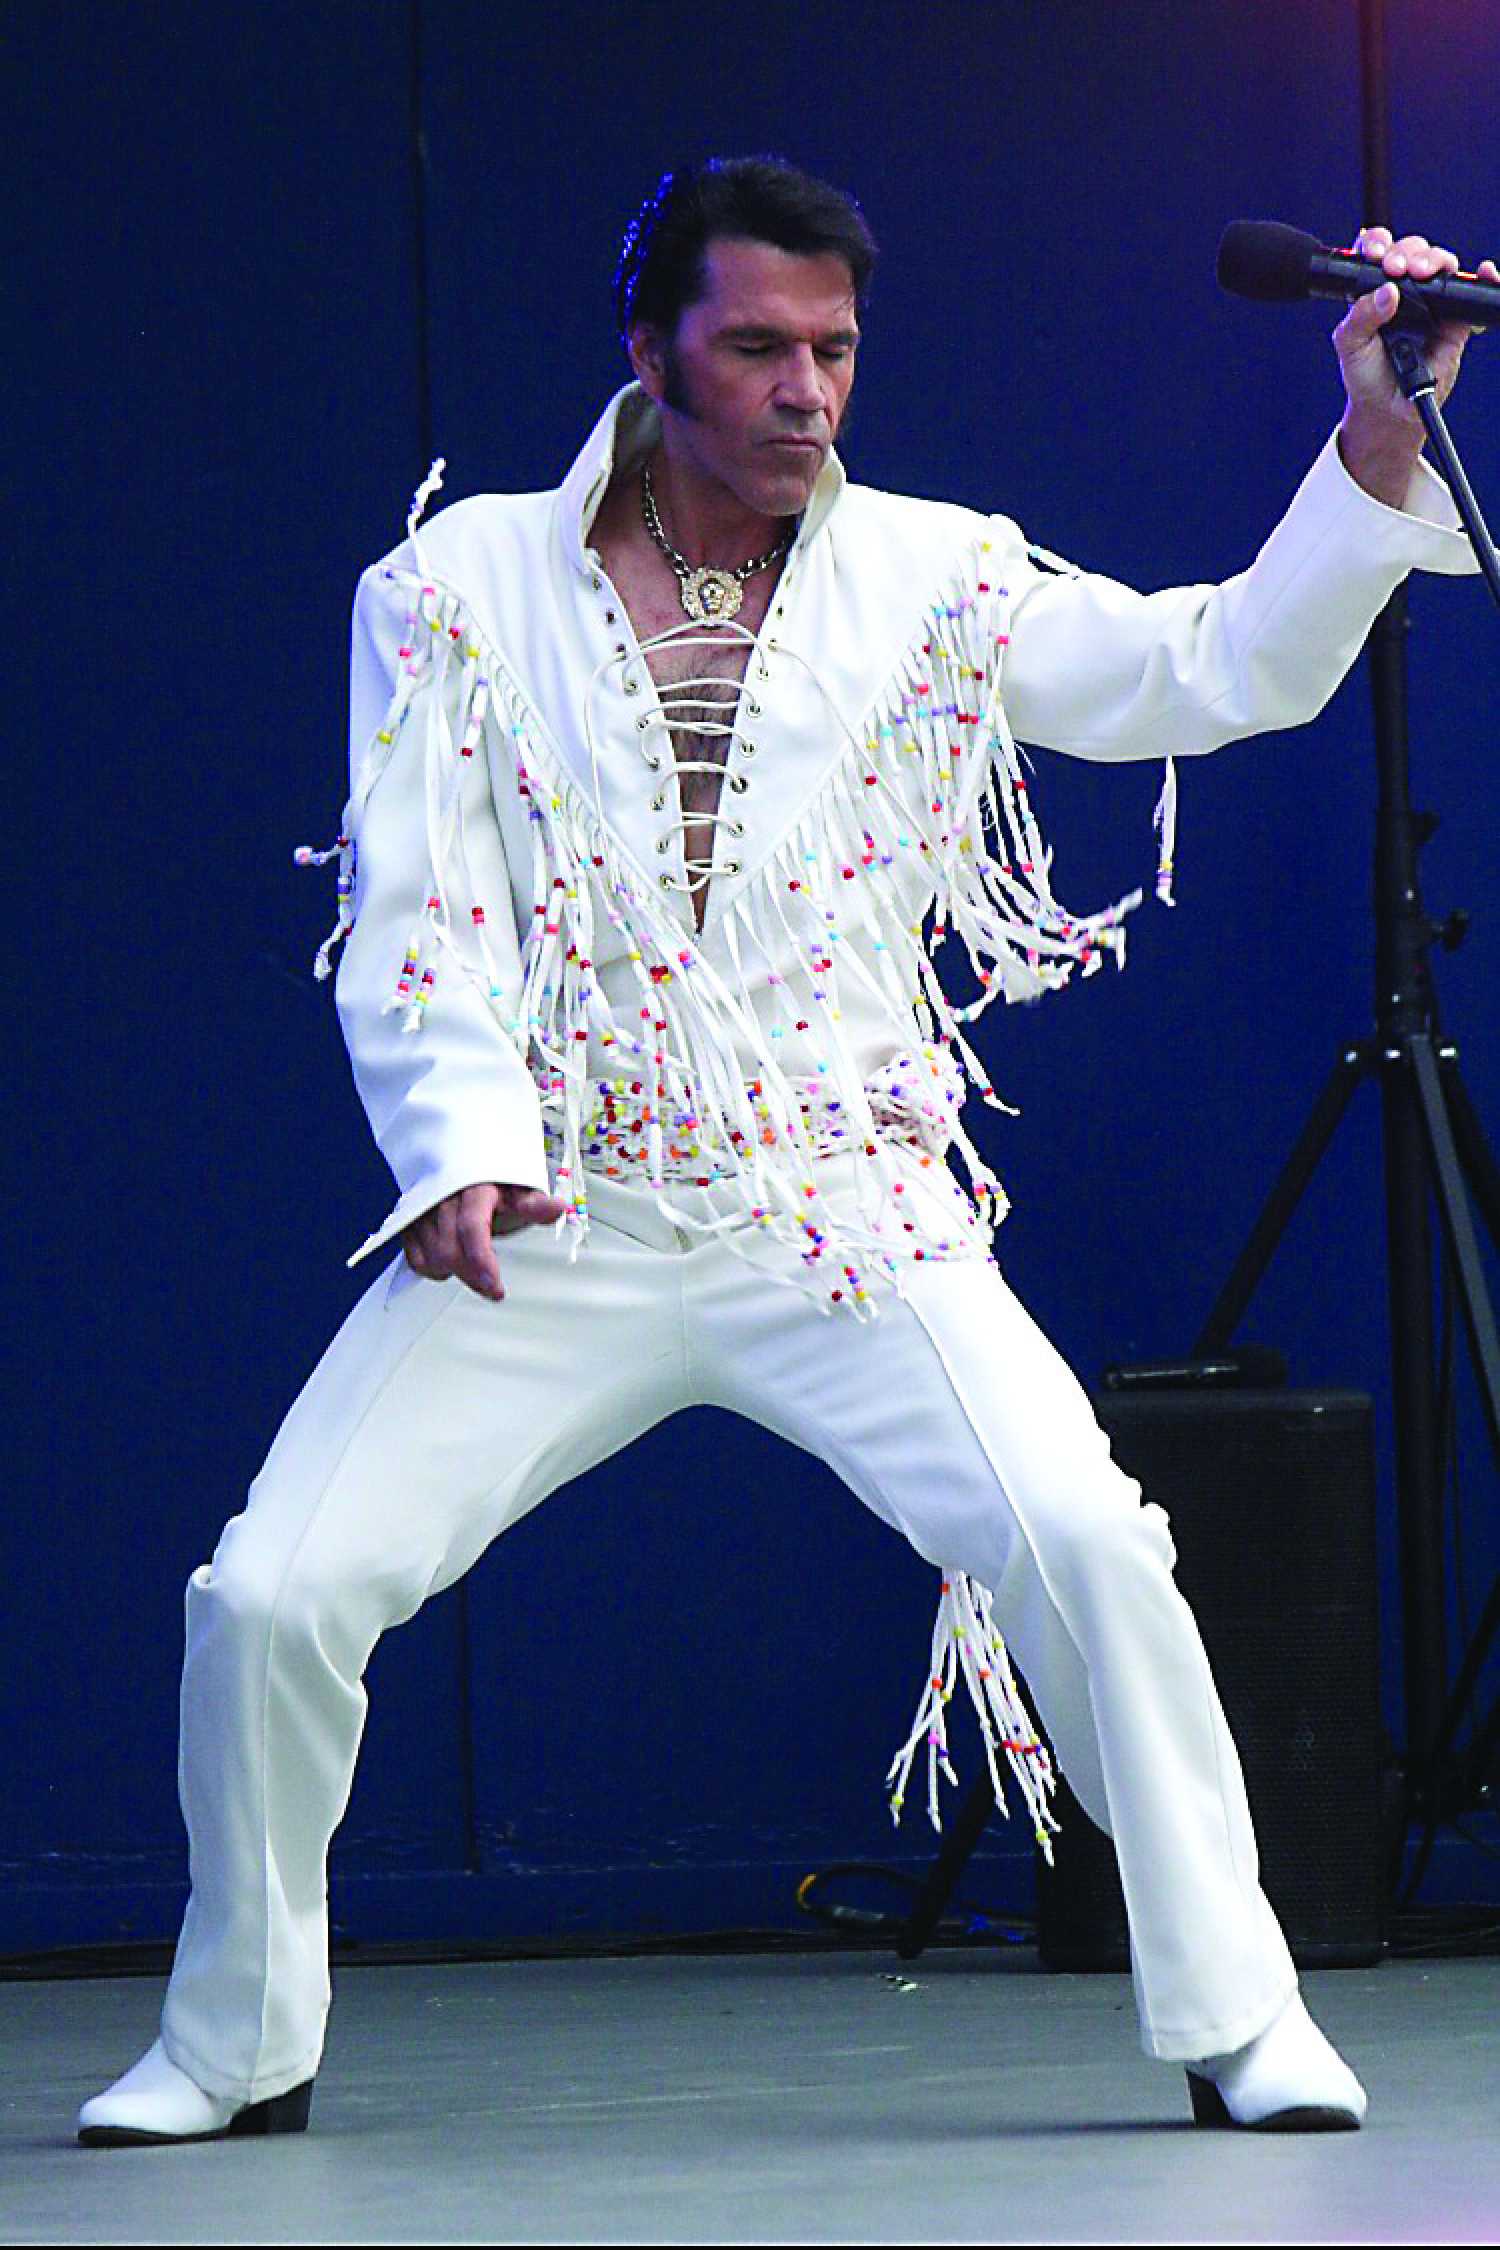 Sylvio Fontaine of Whitewood has been an Elvis Tribute Artist since 1987. He recently won the Heart of the King June 2022 award at the Penticton Elvis Festival in B.C. for having the most compassion as a performer.